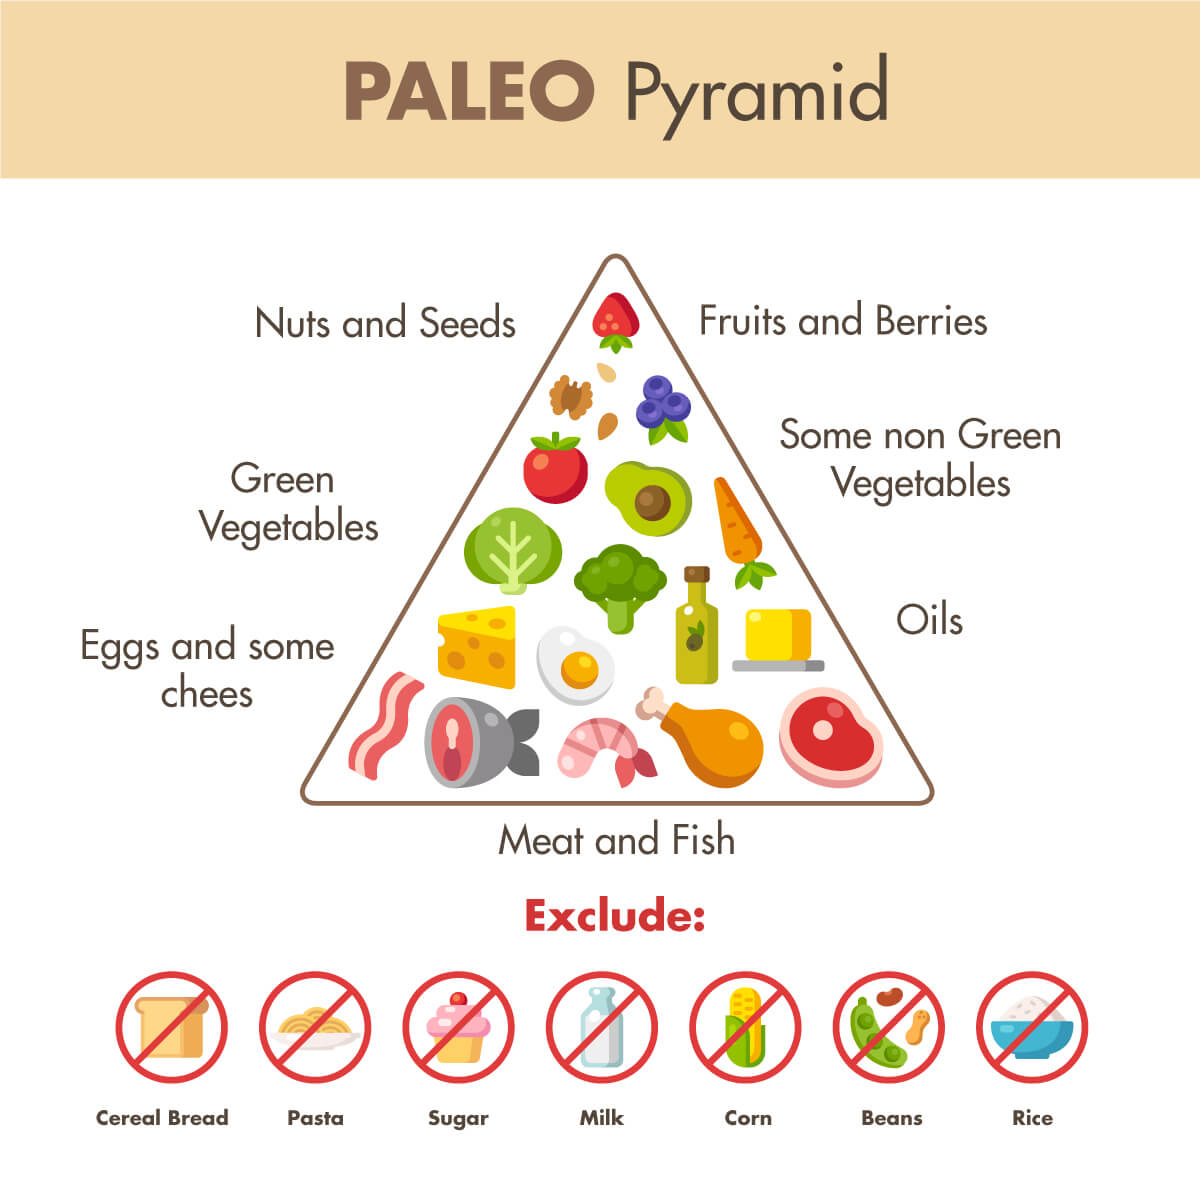 Paleo diet: back to a more natural alimentation - Iswari World